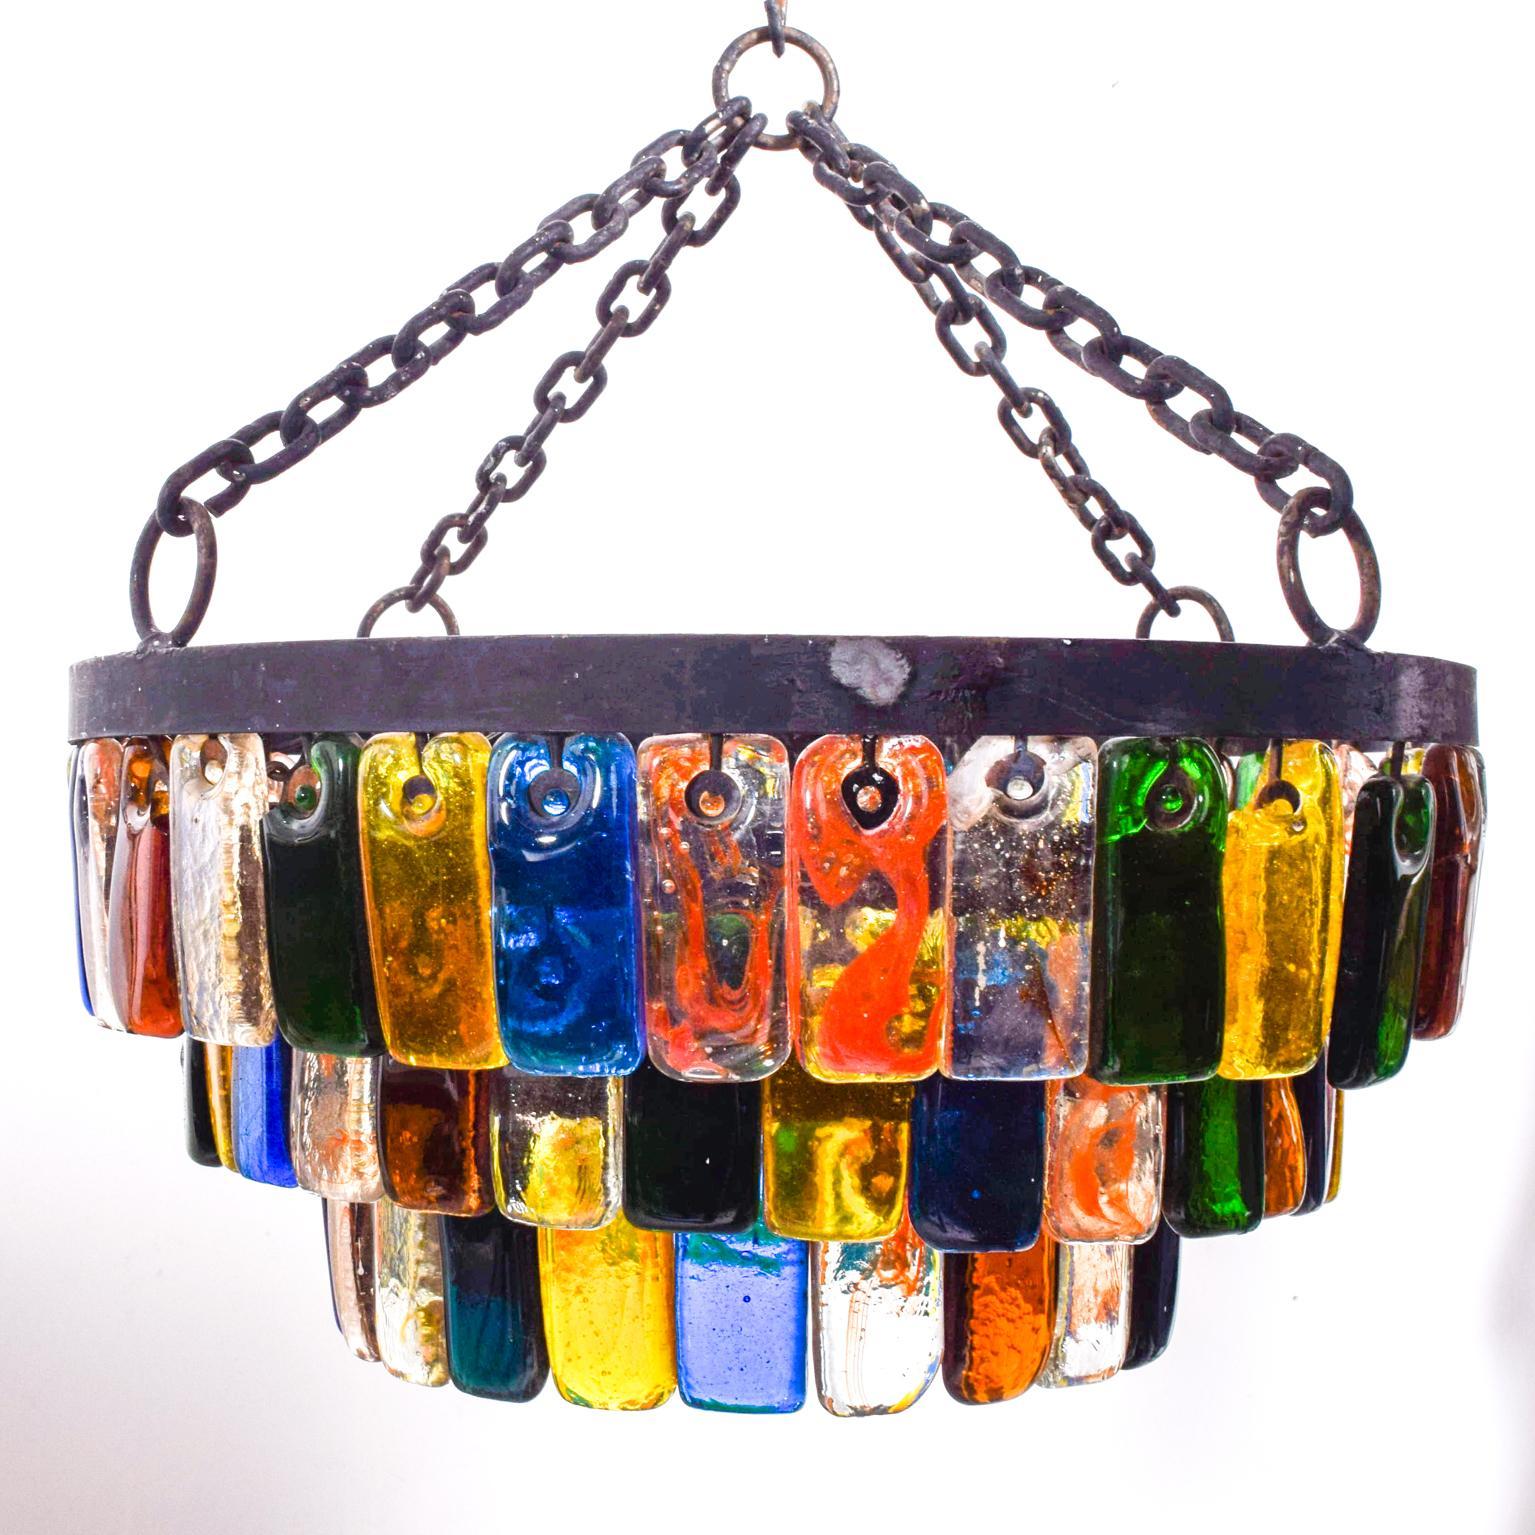 We are pleased to offer for your consideration, a vintage chandelier designed by Delfinger for FEDERS.
Made in Mexico circa the 1970s.
Handblown color glass baguettes in three different layers. Beautiful colors.  Rewired. Dimensions: 20